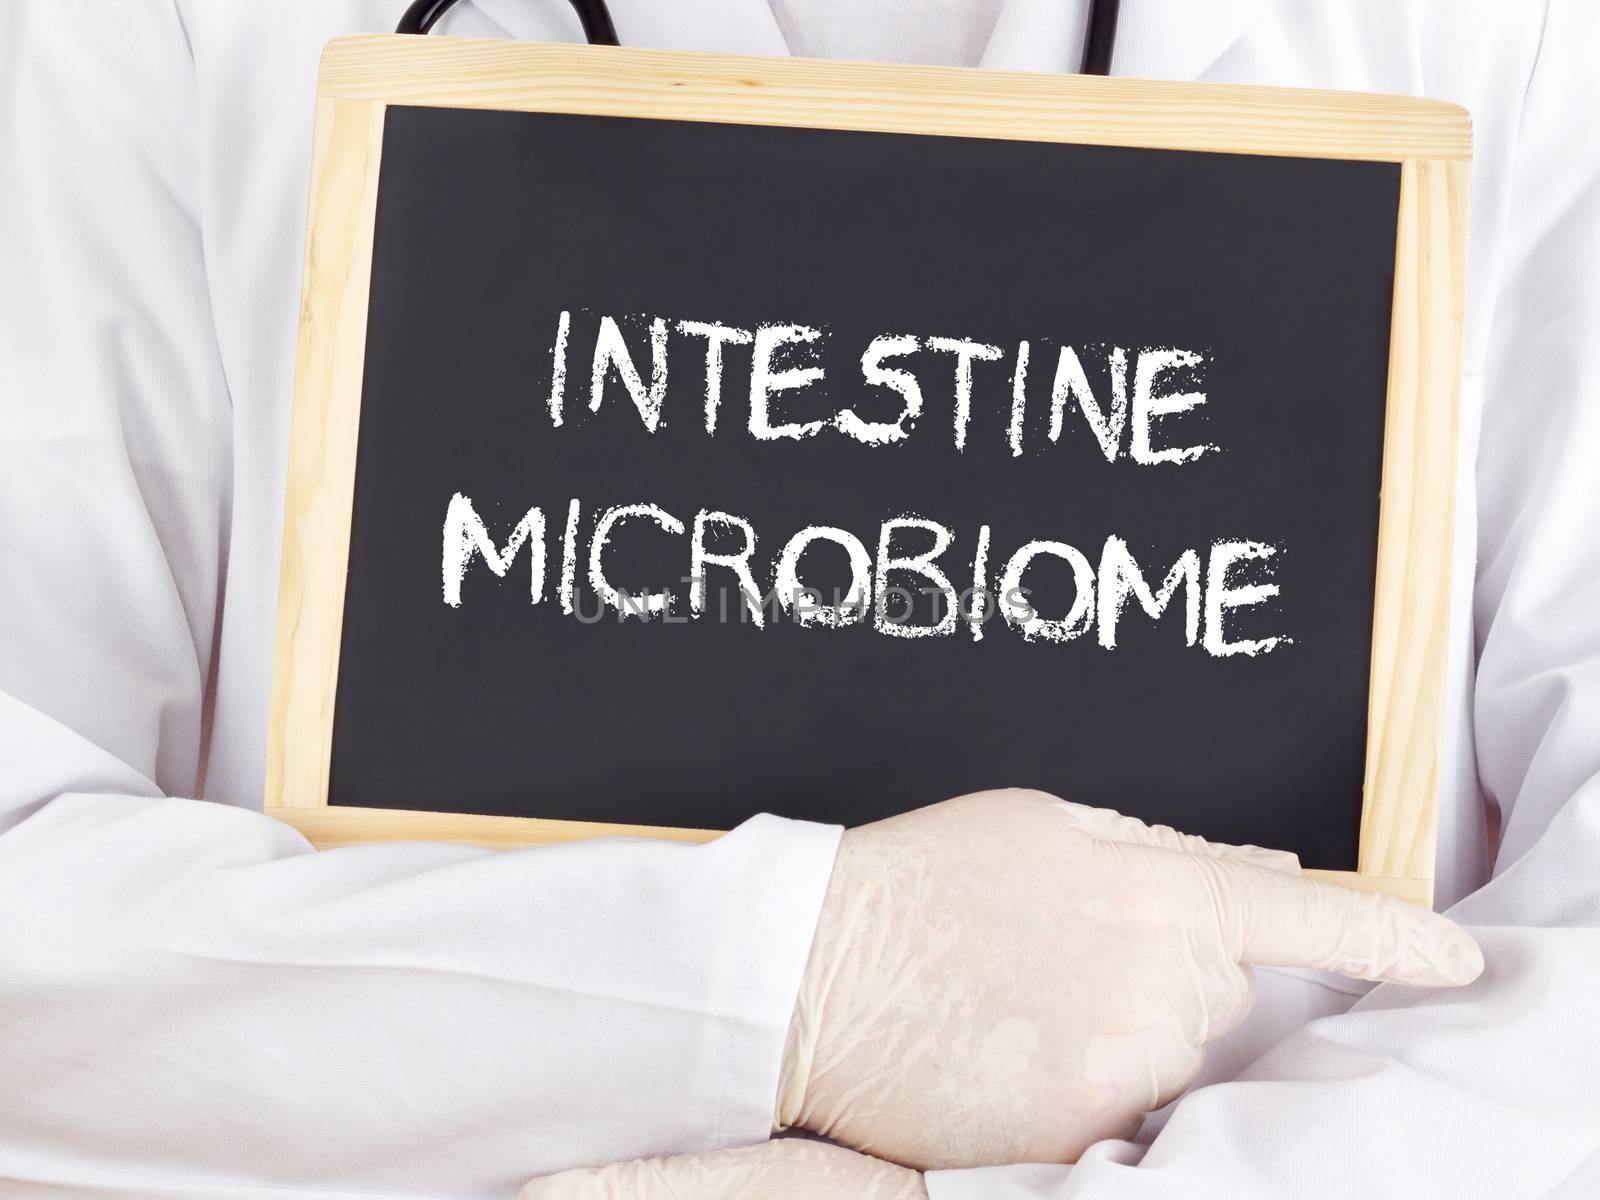 Doctor shows information: intestine microbiome by gwolters